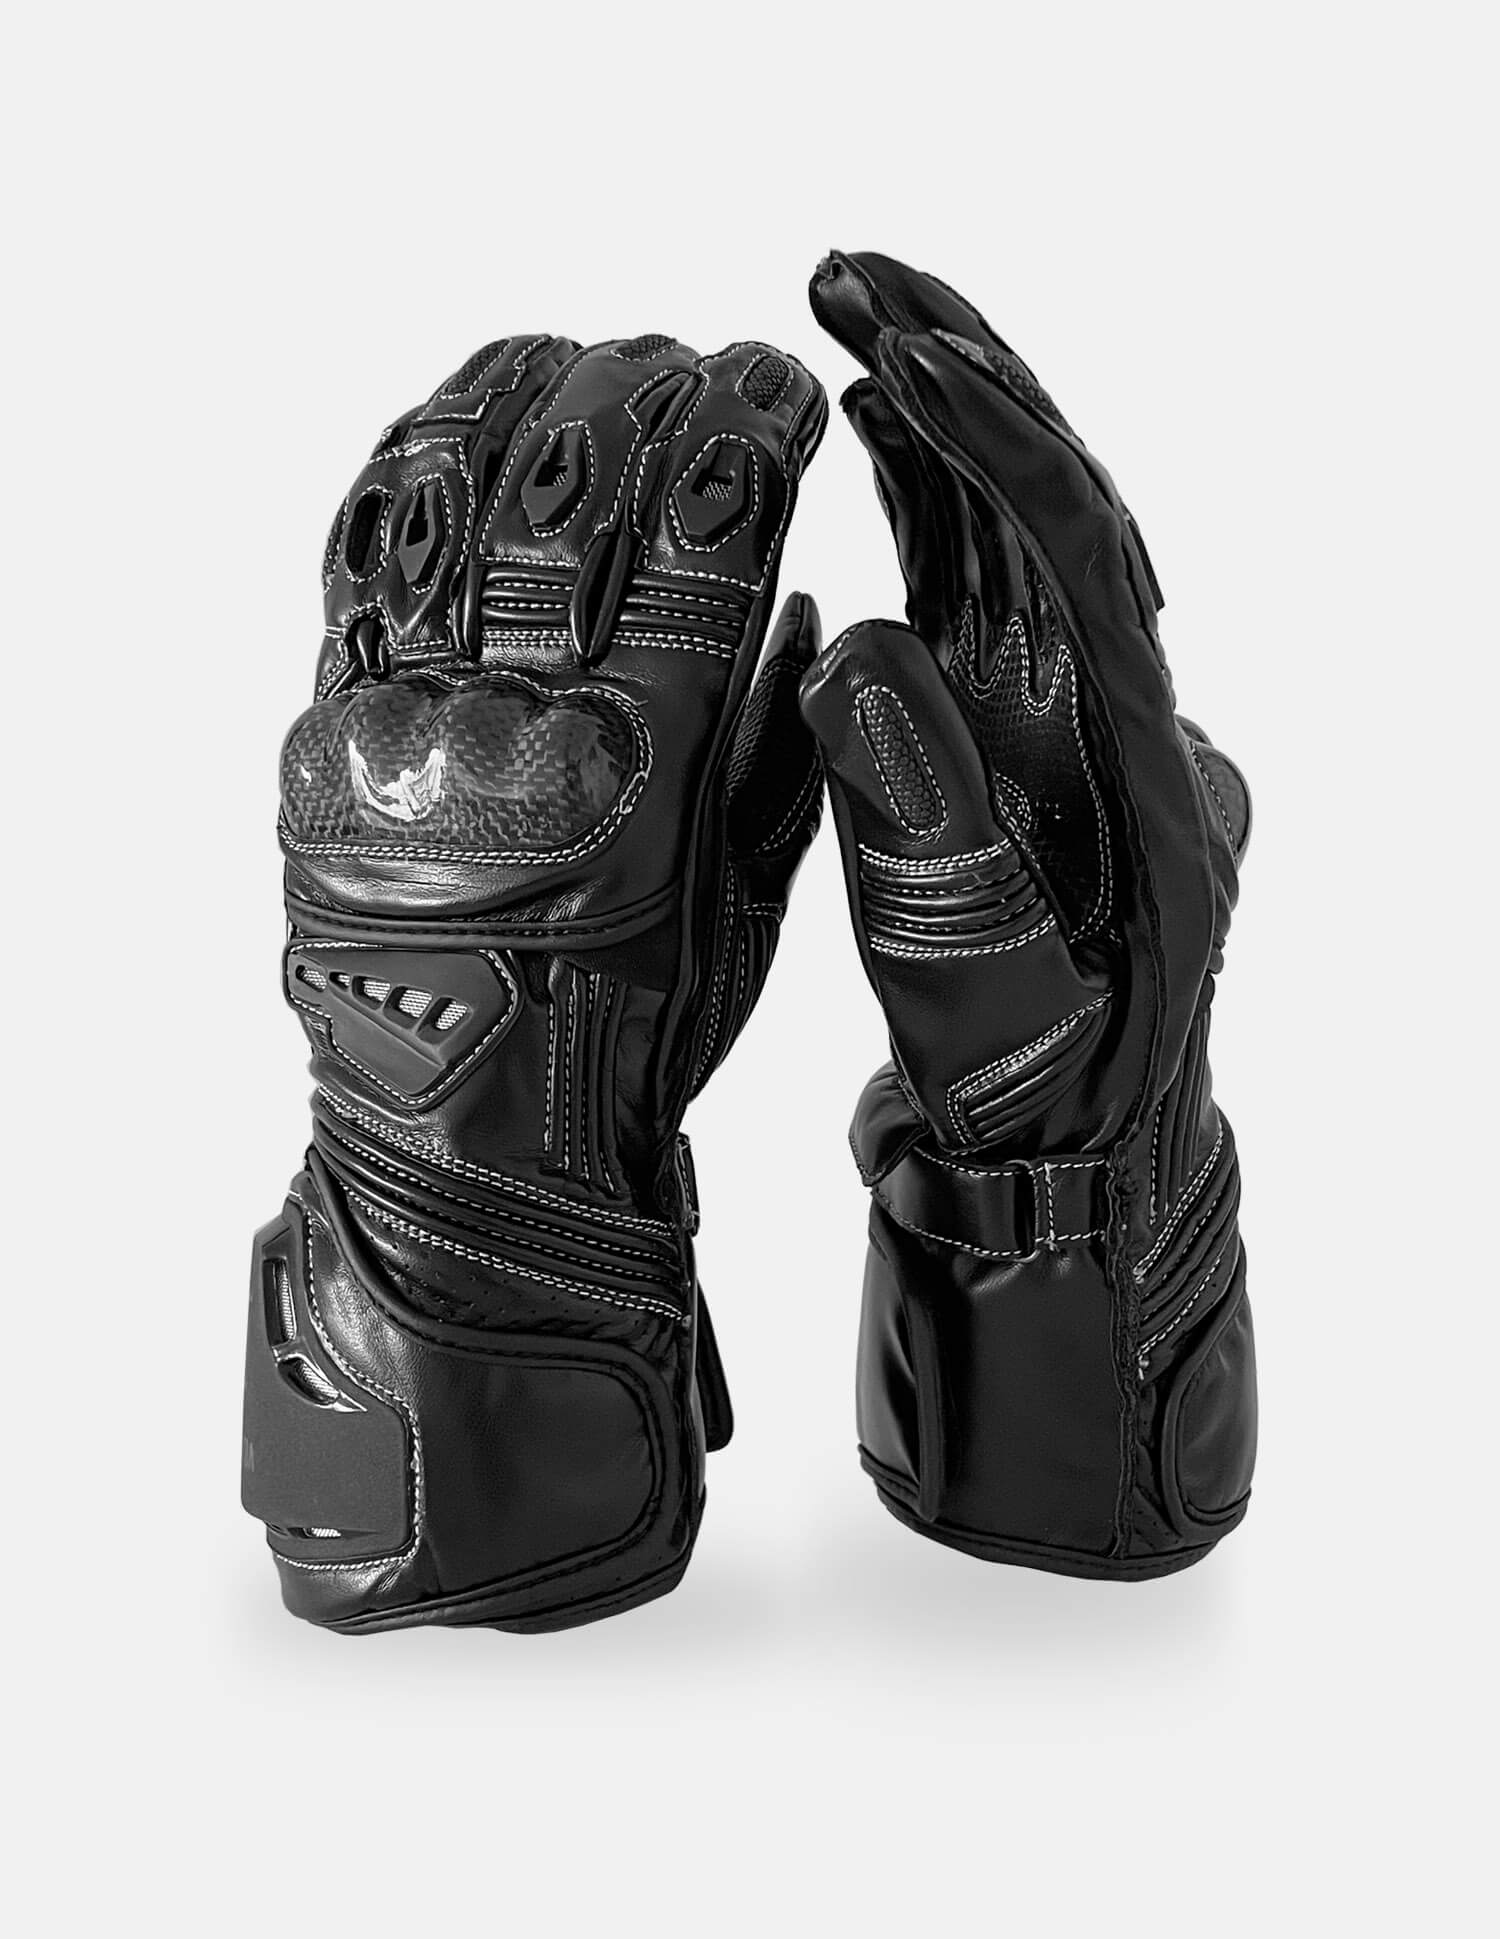 Neowise jacket 2 + Meteor gloves pack